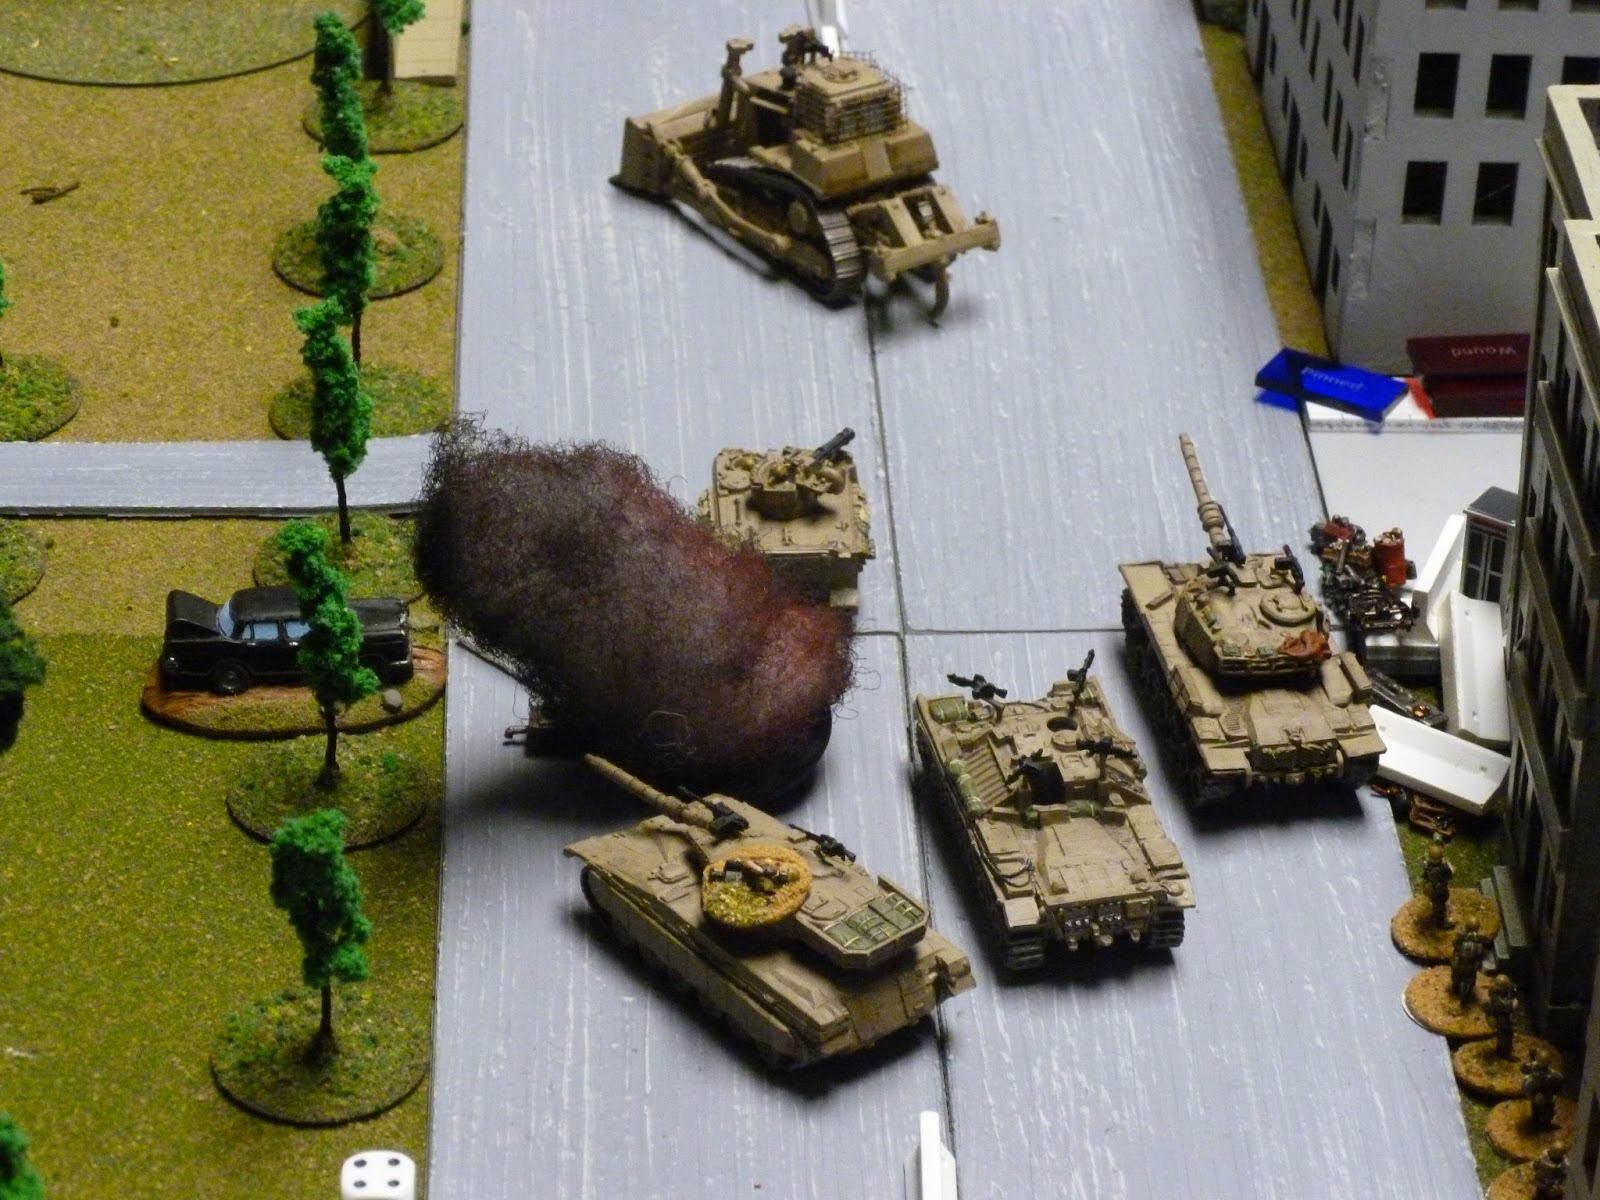  The Magach has moved up to fire on the T-34 with the now mobile Nagmashot in attendance. 